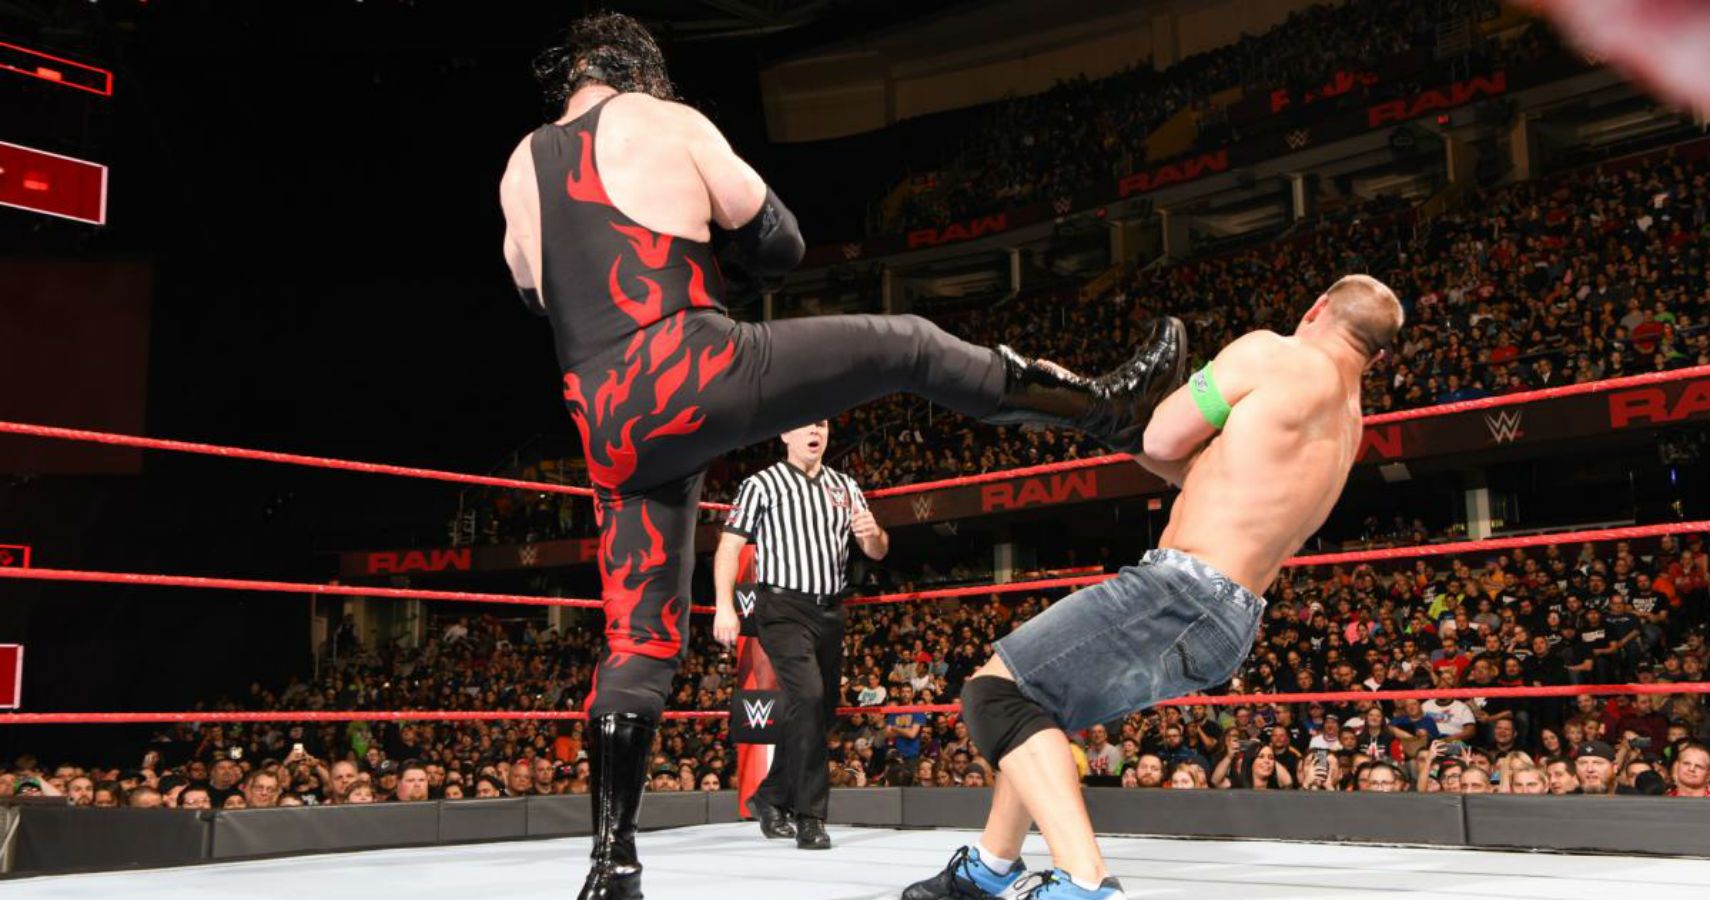 of the Andre Battle Royal and another Kane main event highlight the best an...